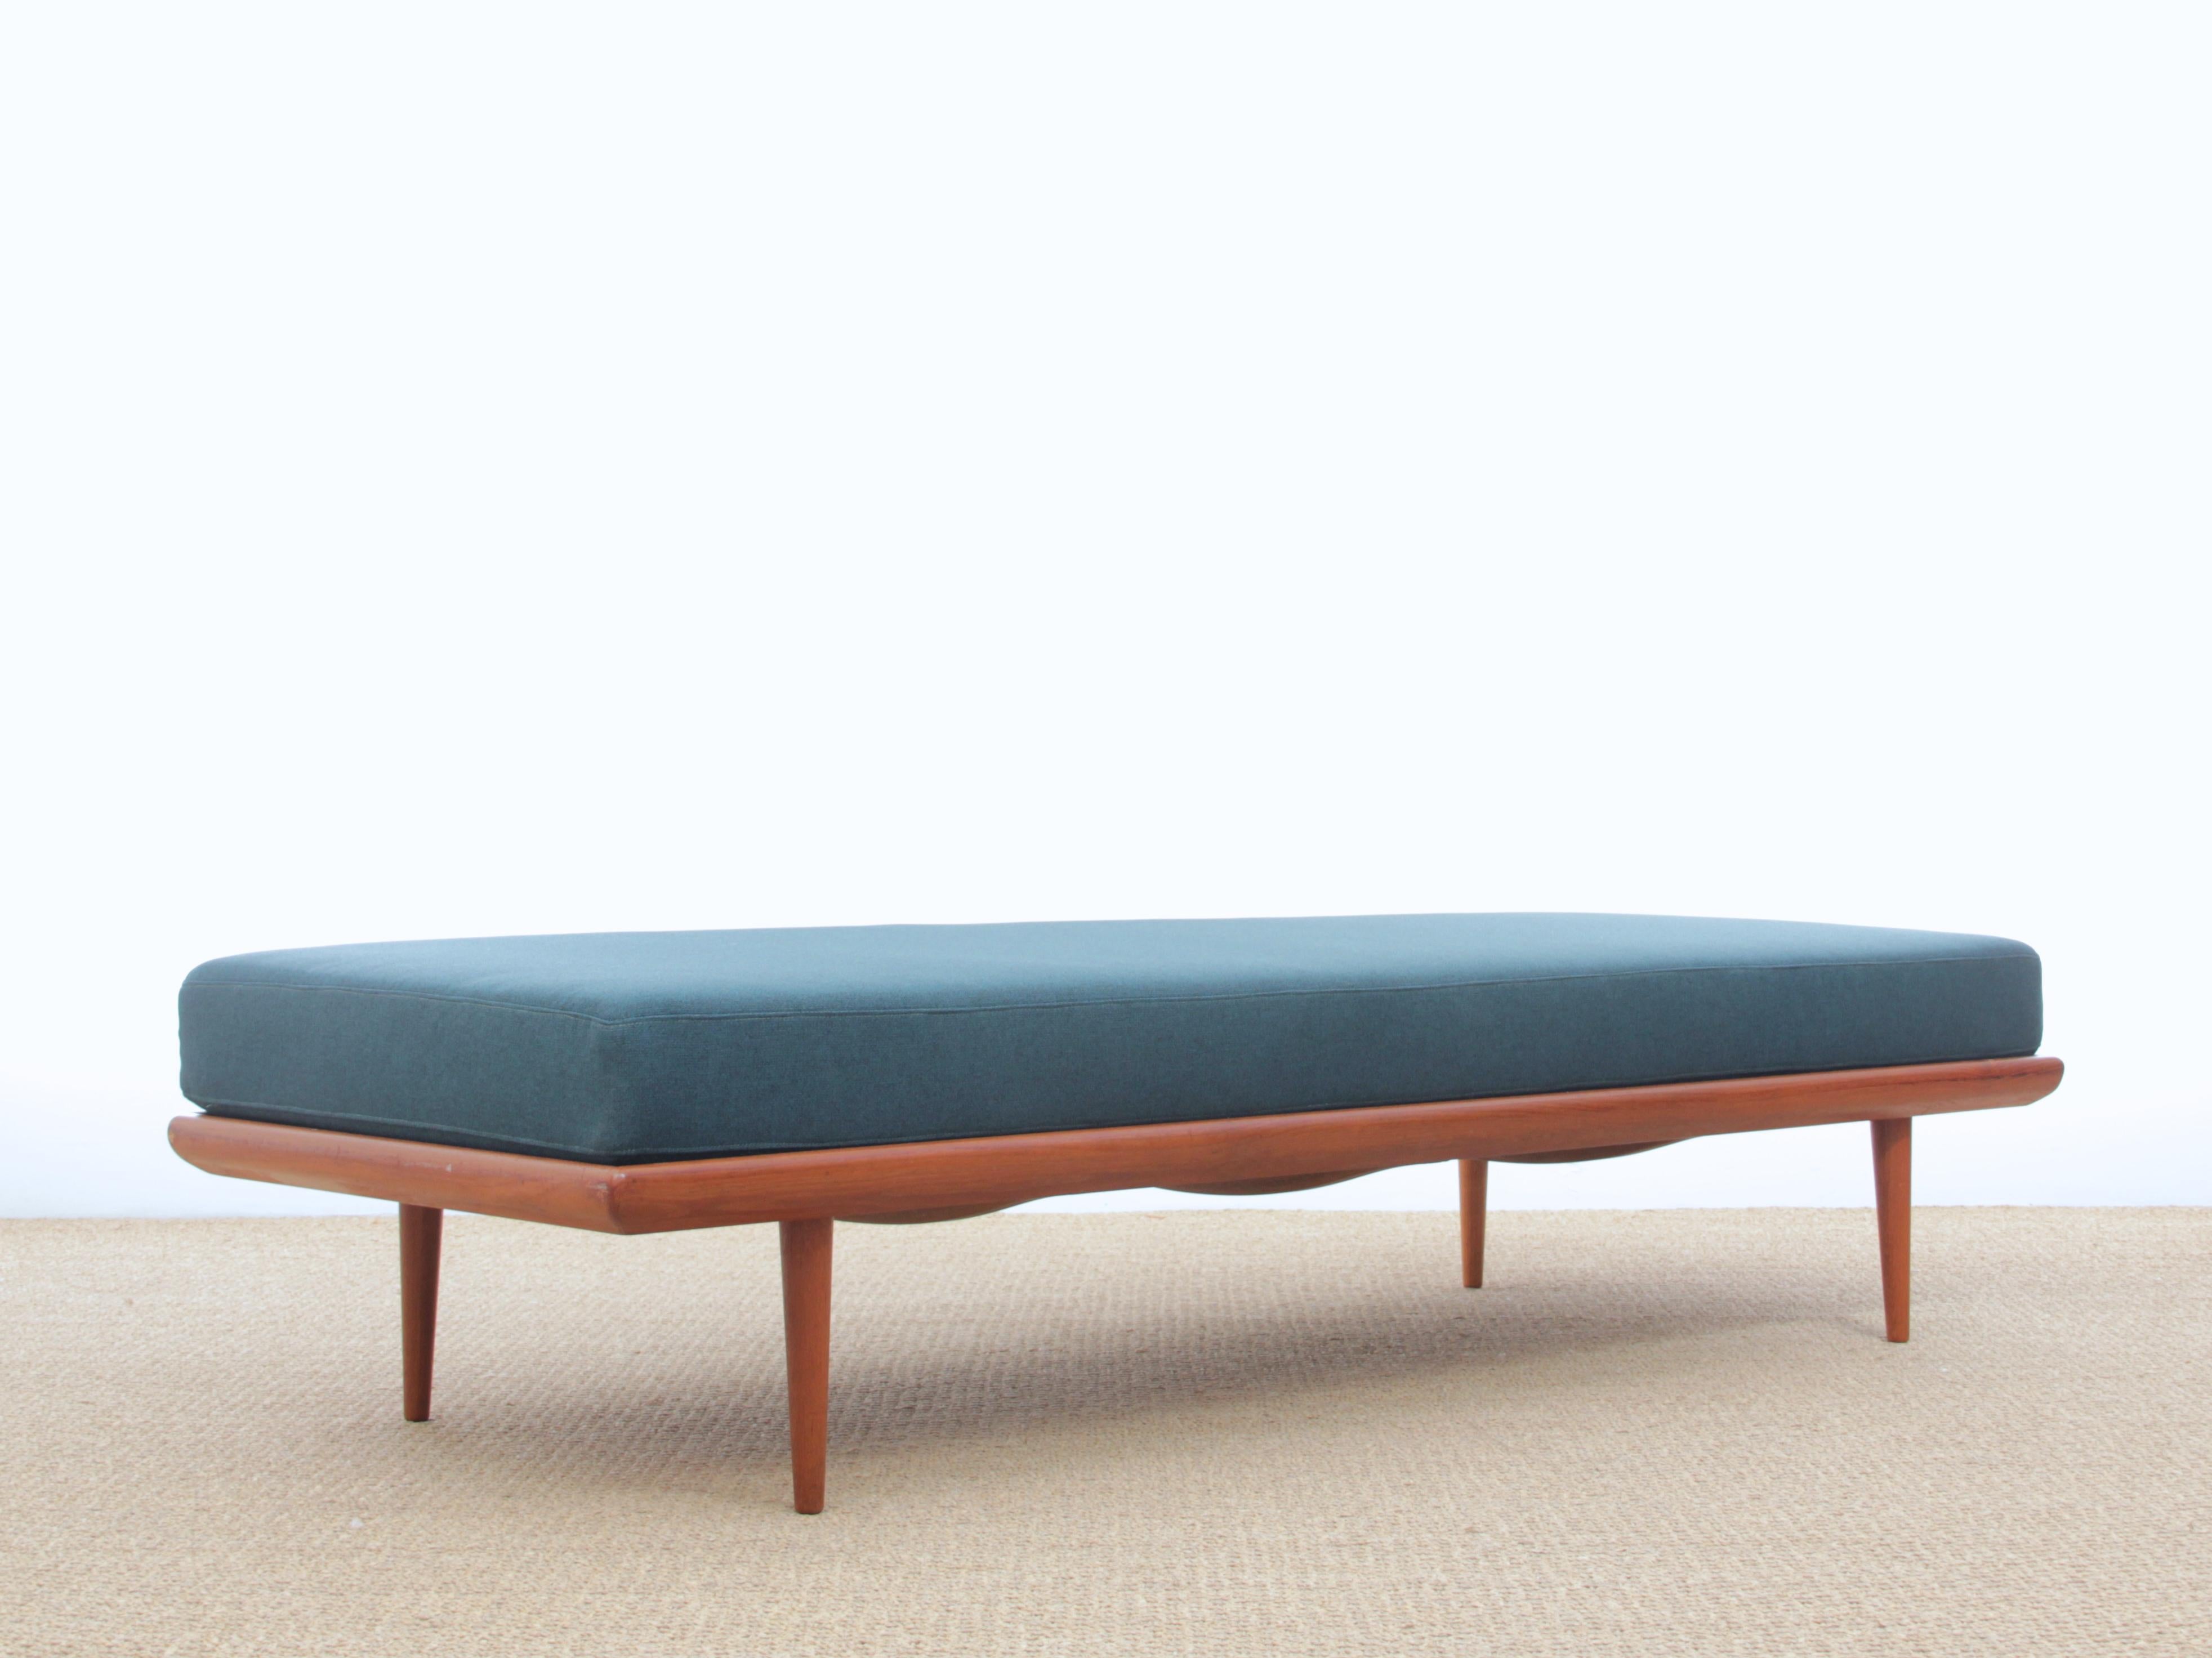 Minerva daybed by Peter Hvidt & Orla Mølgaard-Nielsen. Mattress and back will be reupholstered with fabric of your choice. The price includes the renovation.